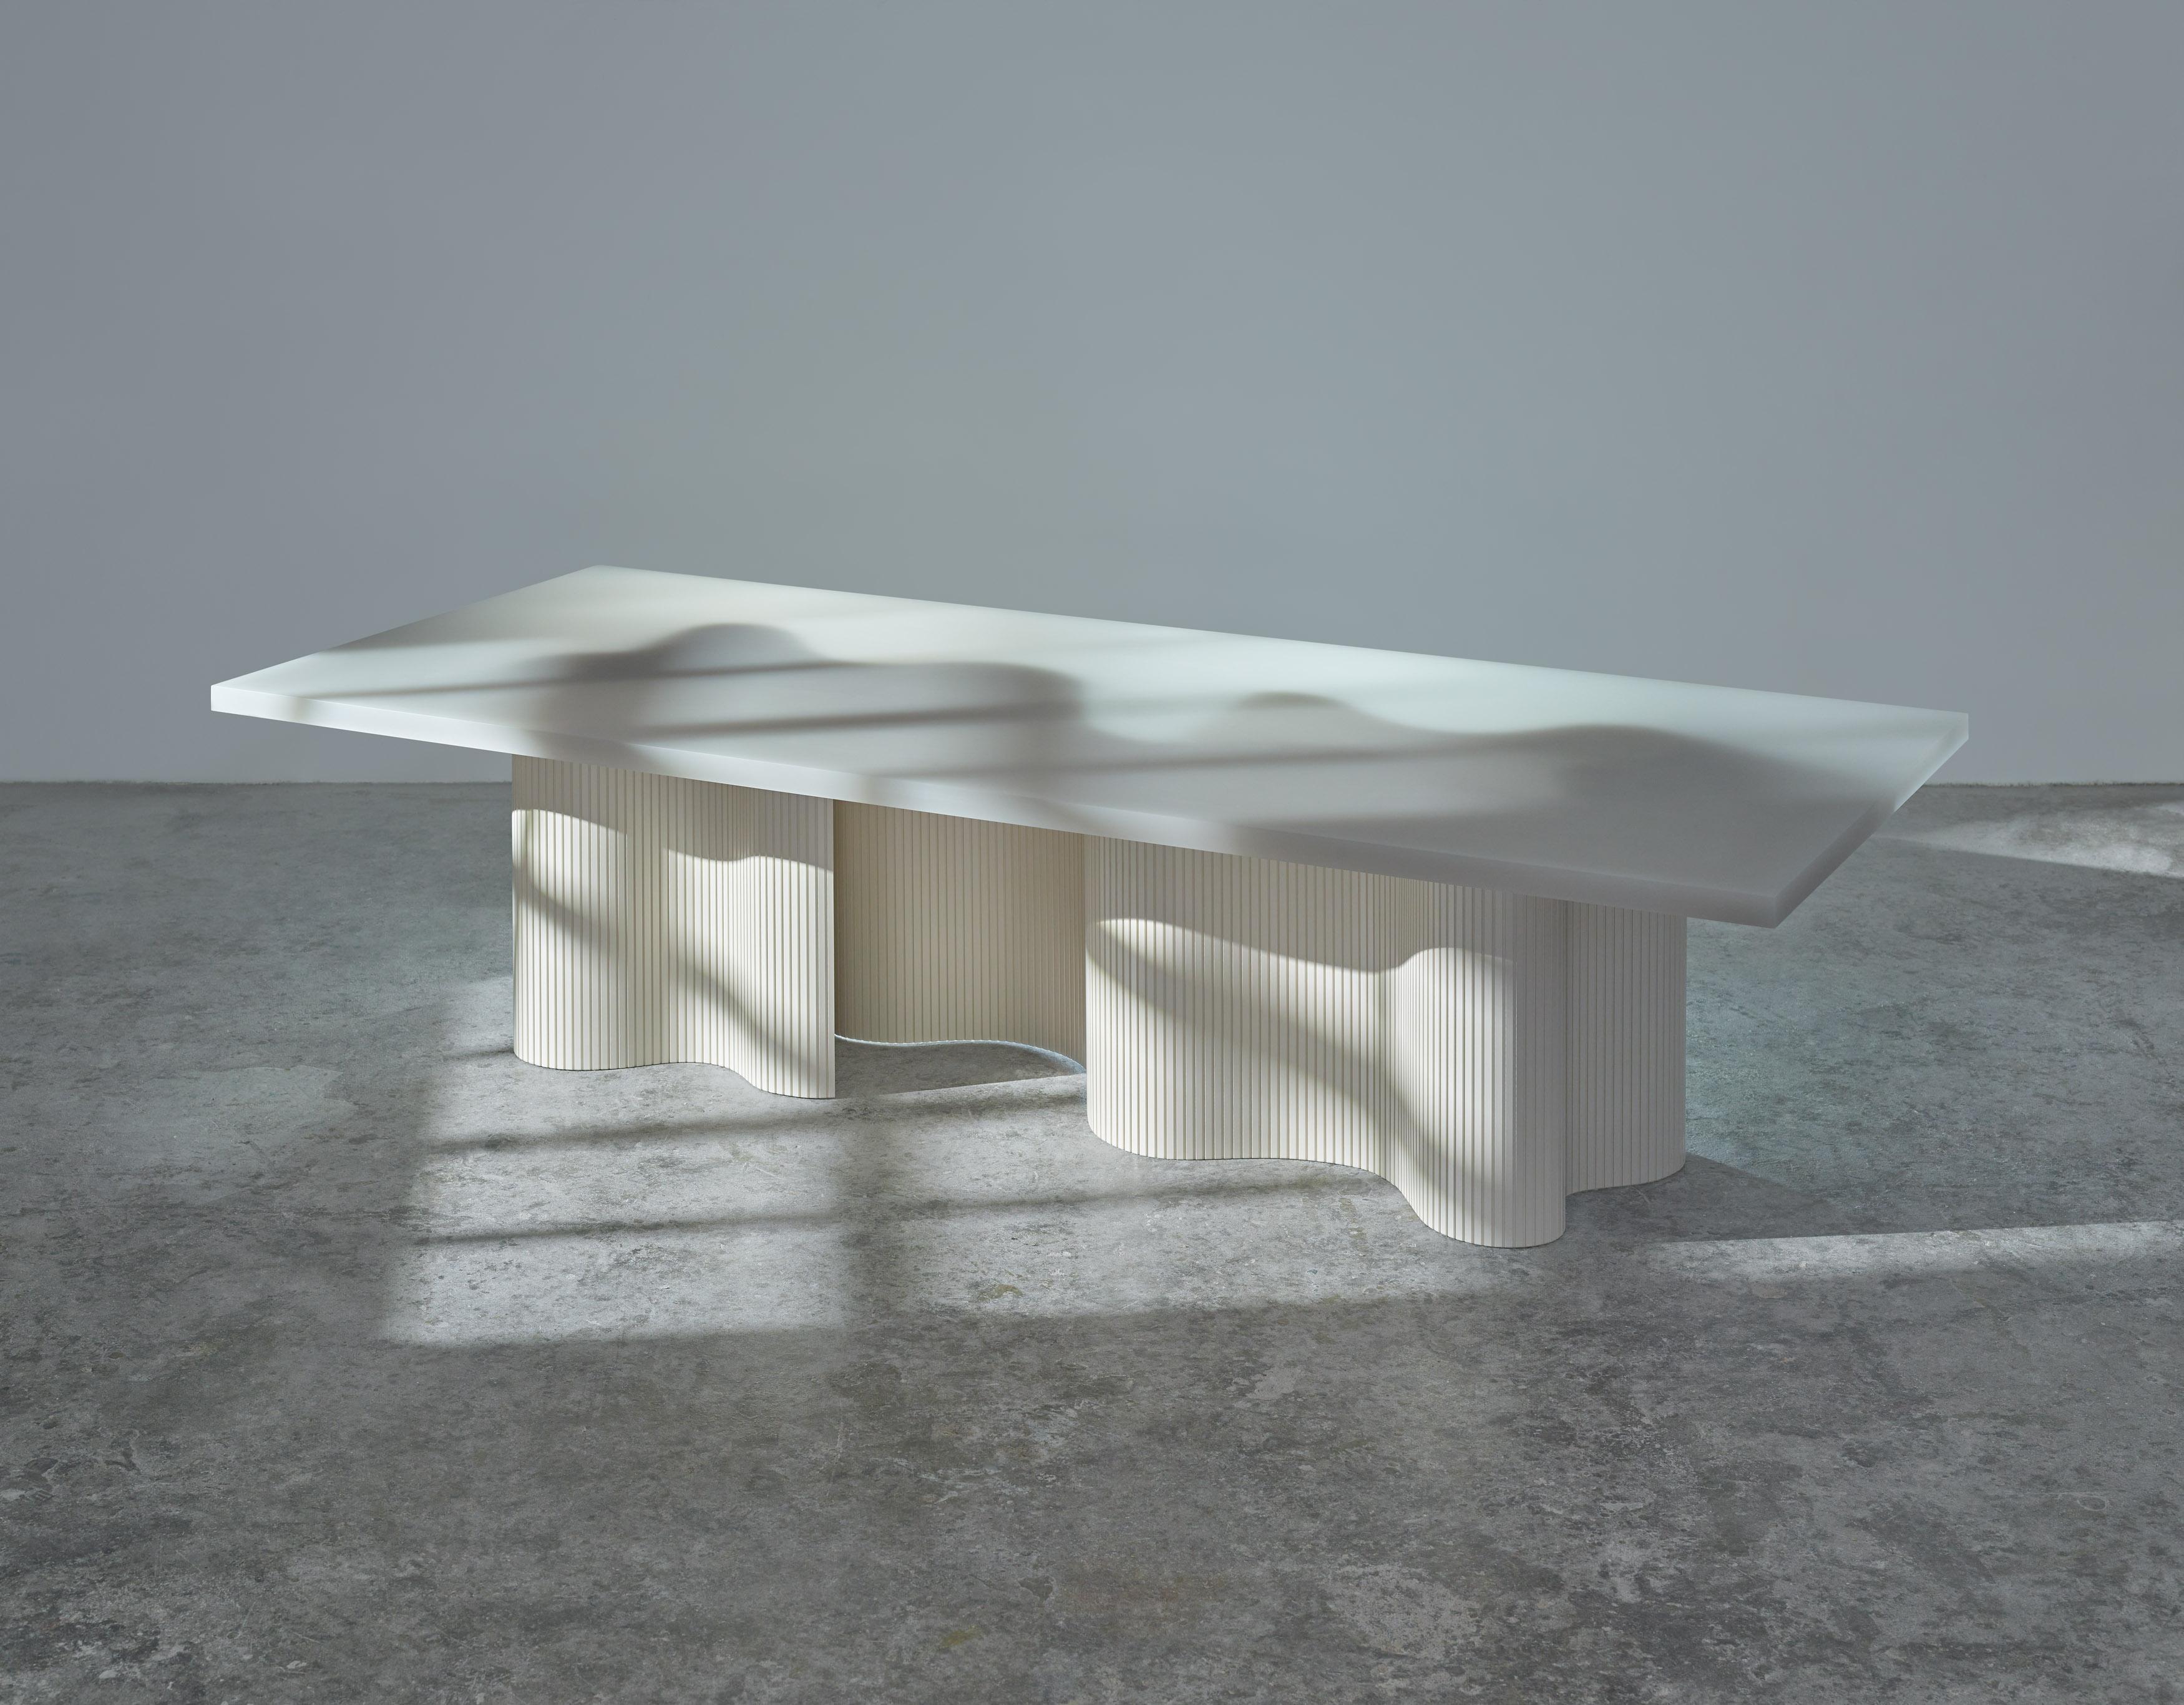 Spine is a series of tables consisting of two components, a thin aluminum sheet captured in
a cast resin surface. The series is a result of many material explorations concerned with bent forms and enhanced flexibility. 

The spine of each table